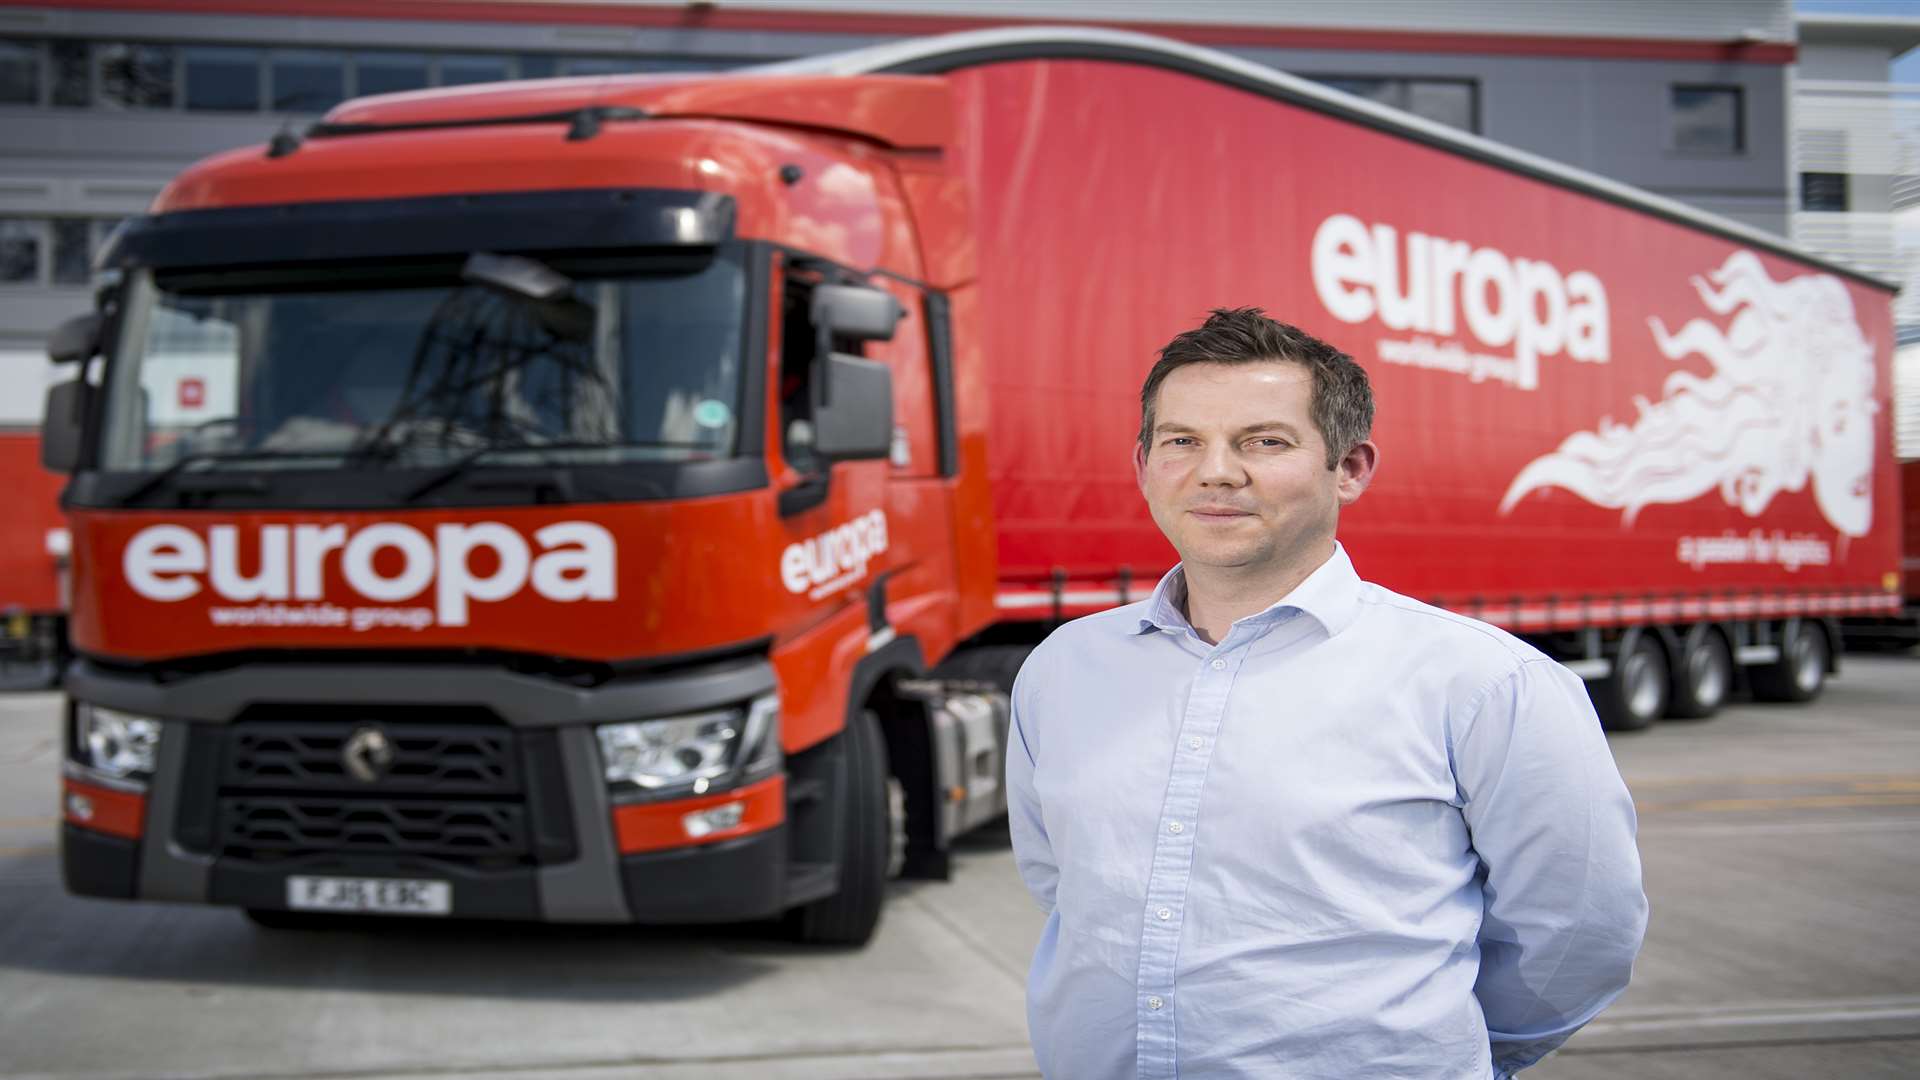 Dan Cook, director of operations at Europa Worldwide Group